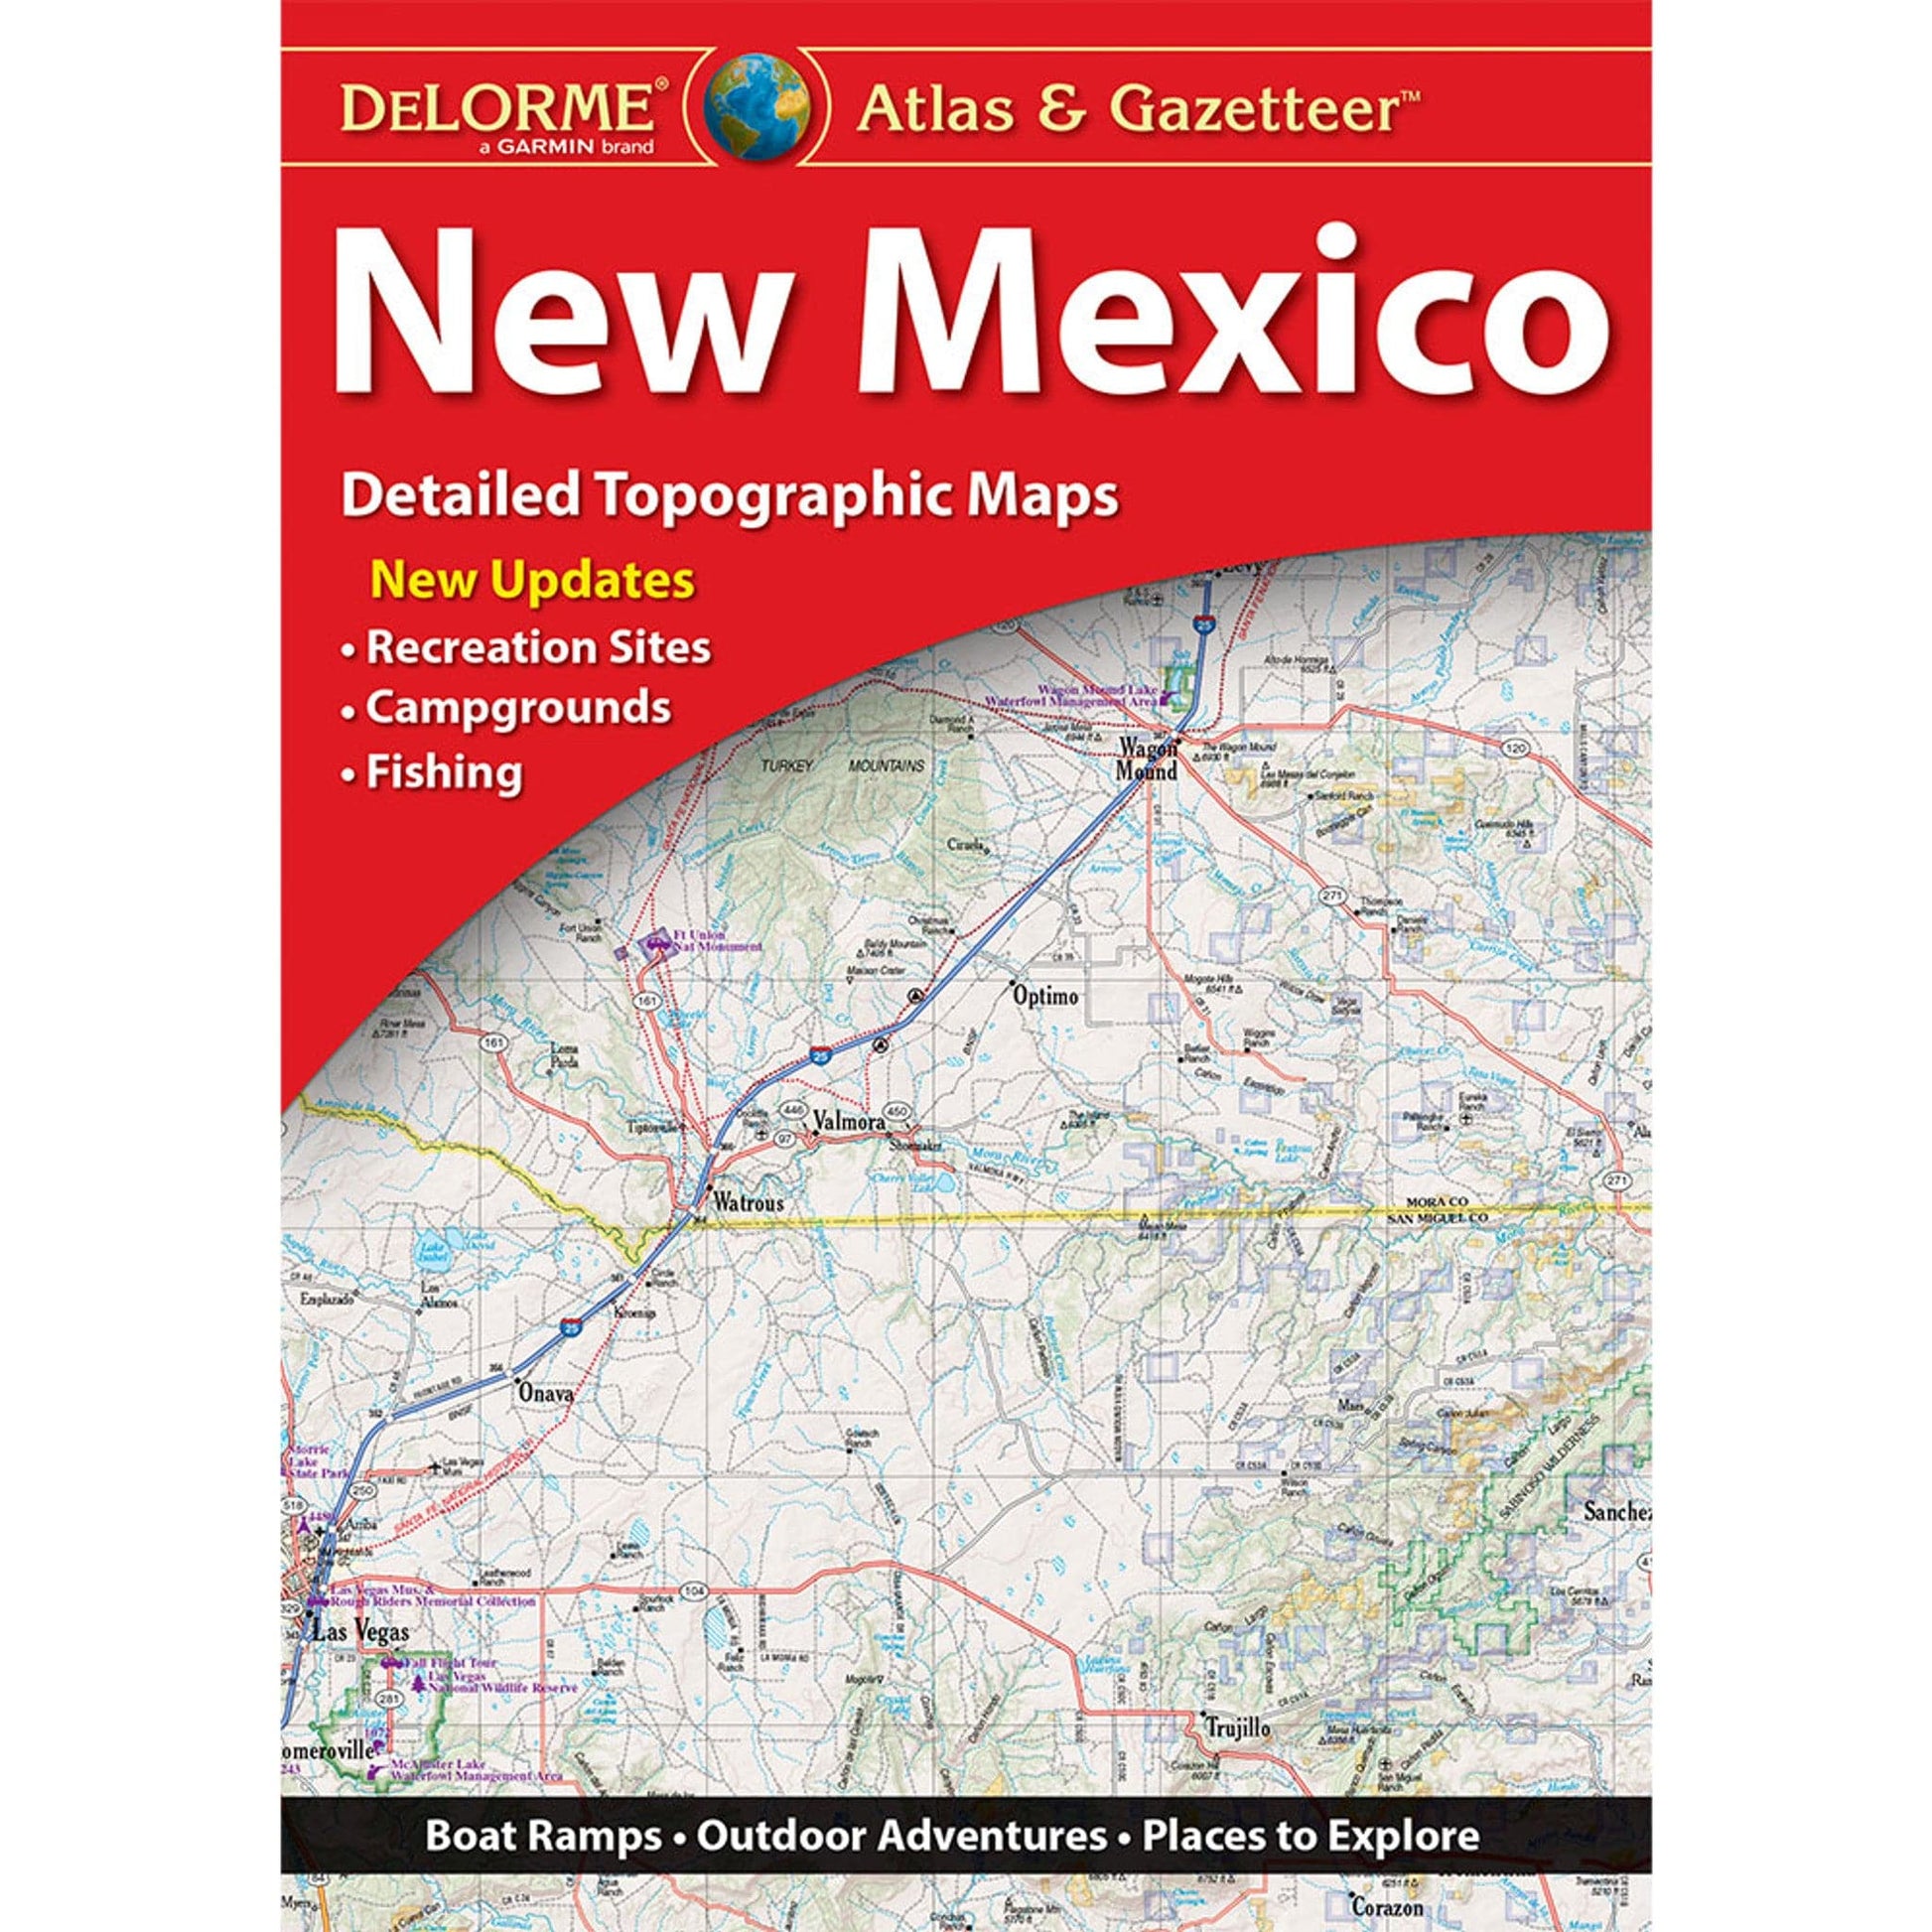 Featuring the Atlas & Gazetteer atlas, gazetteer, map, new mexico manufactured by Partners West shown here from one angle.